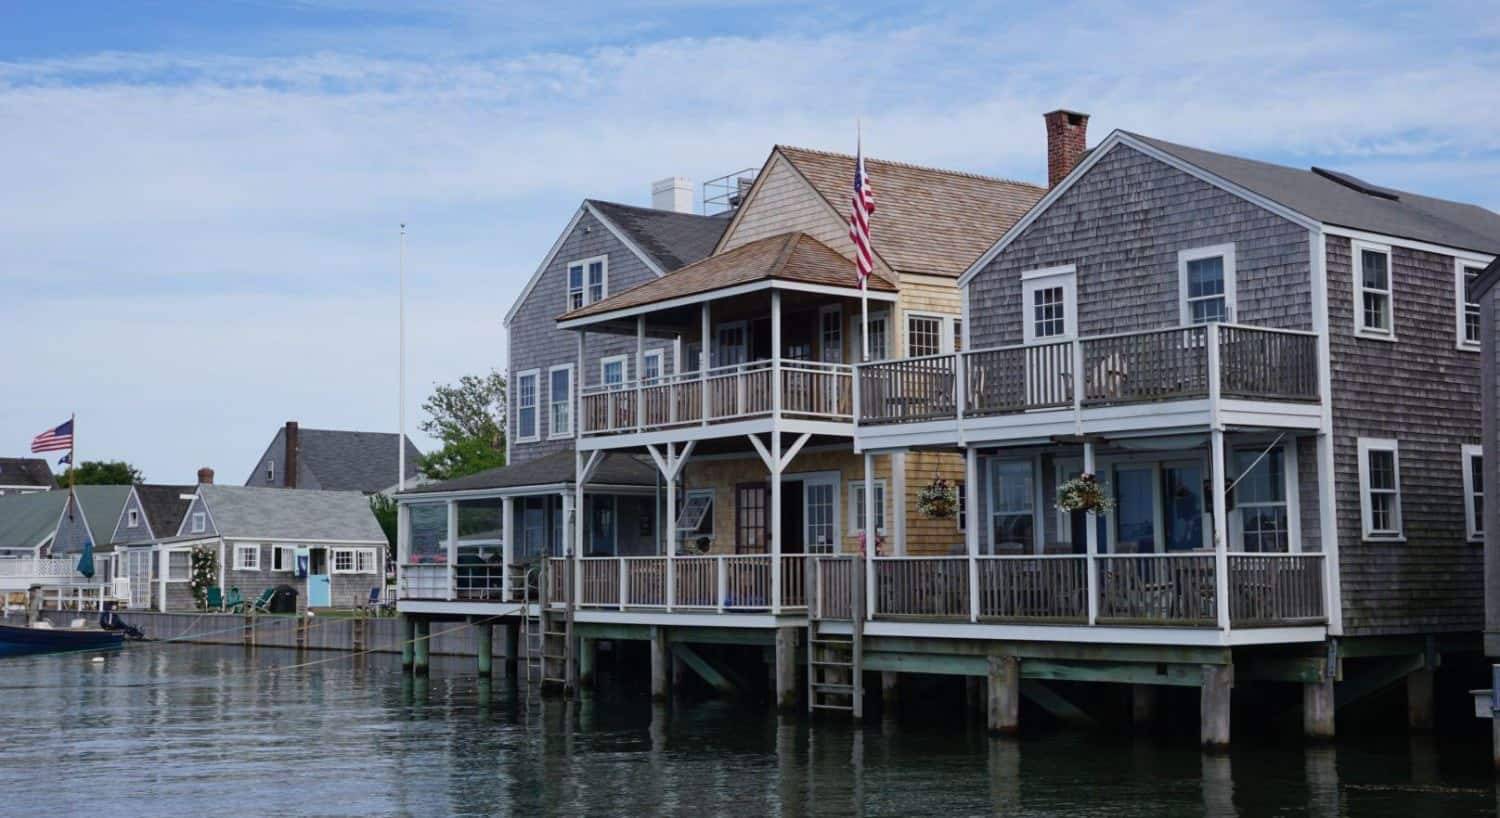 Traditional New England homes with cedar shake siding and white trim right on the water